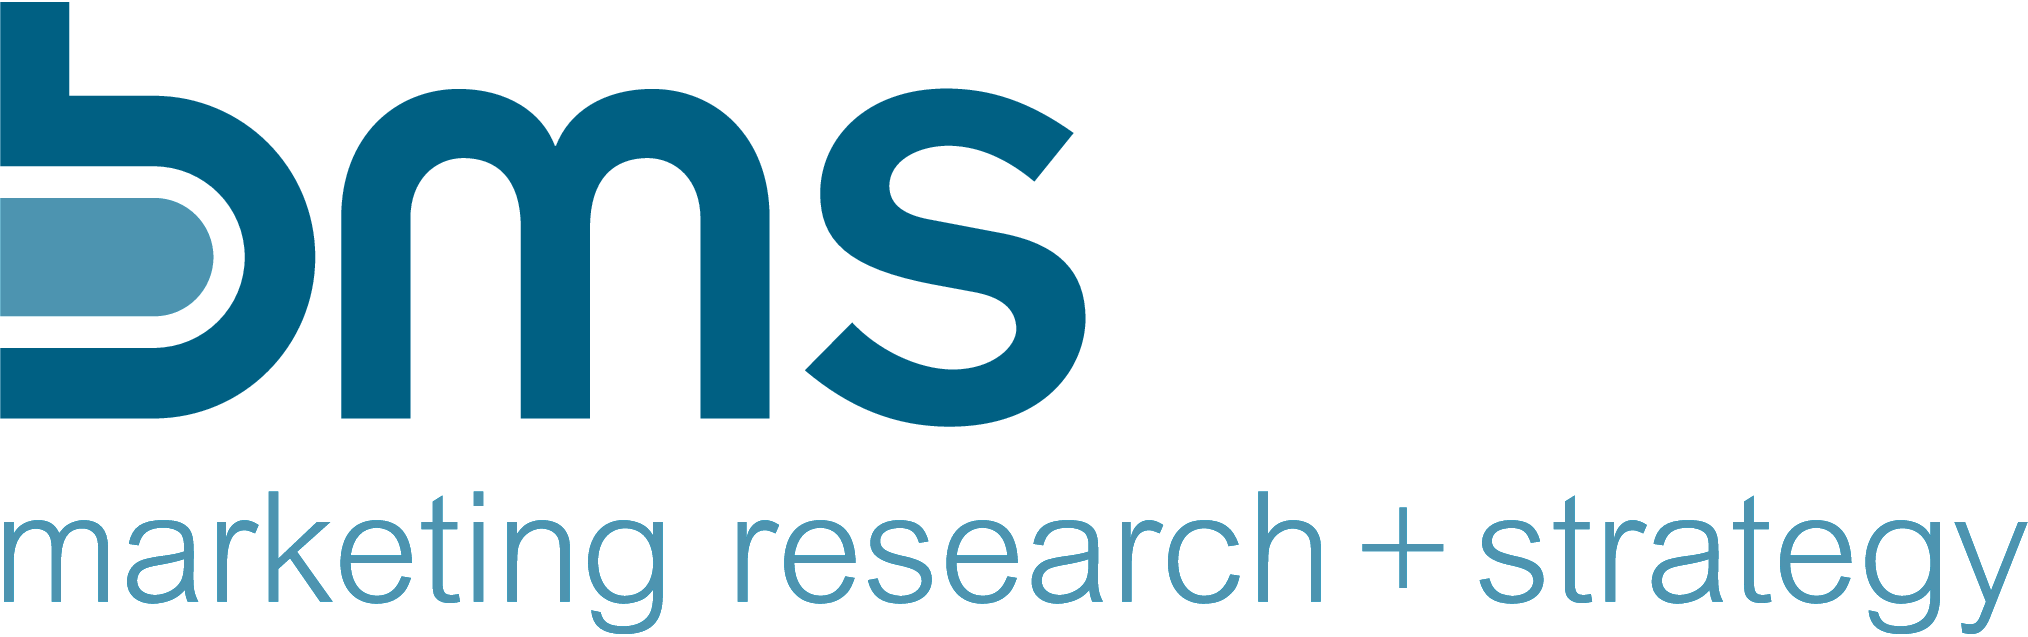 bms marketing research + strategy